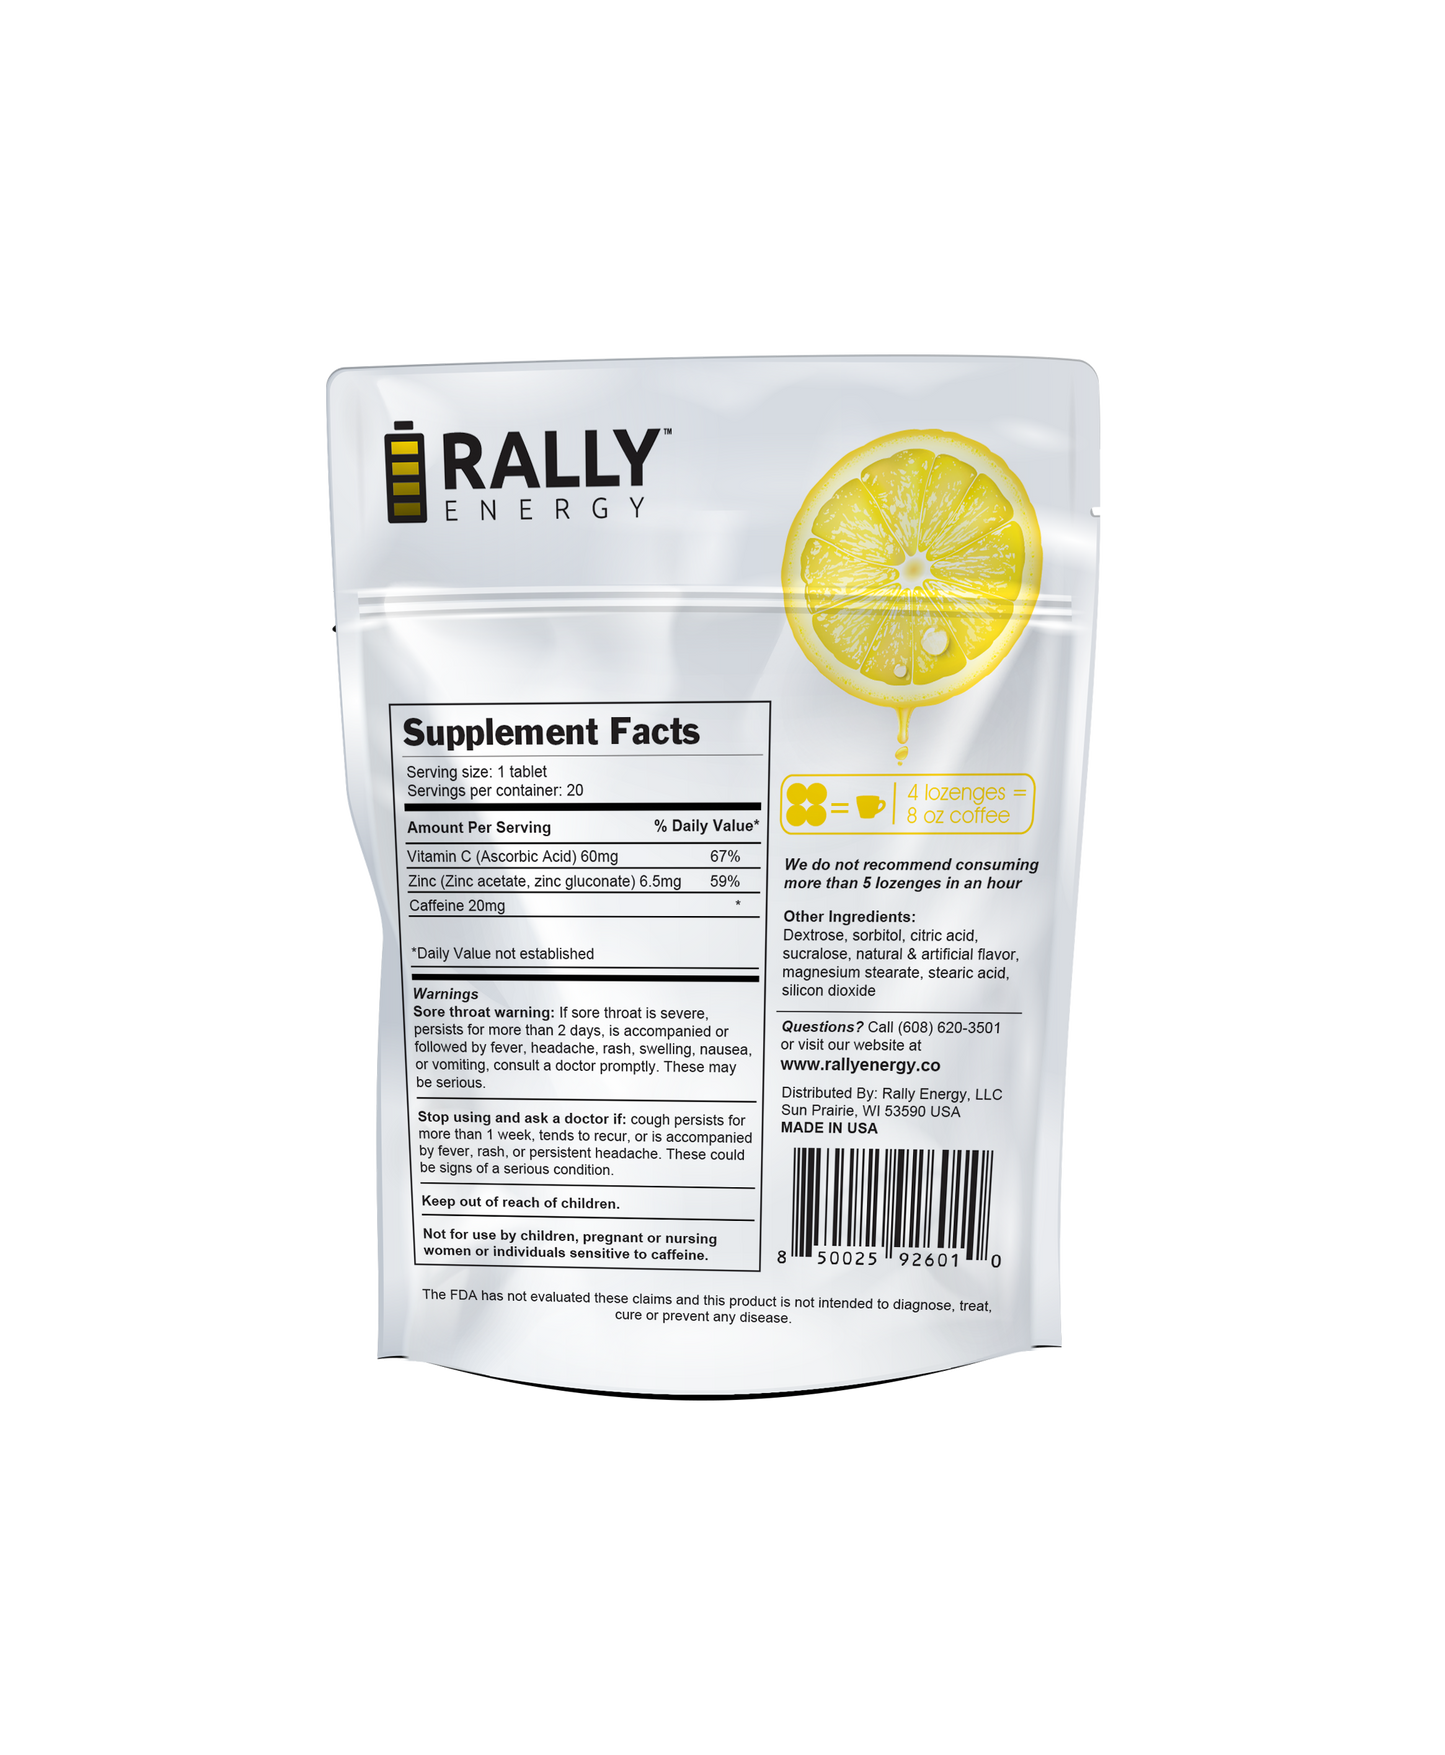 Rally Energy Cough Relief - Caffeinated, Lemon Flavored Cough Lozenges - Travel size